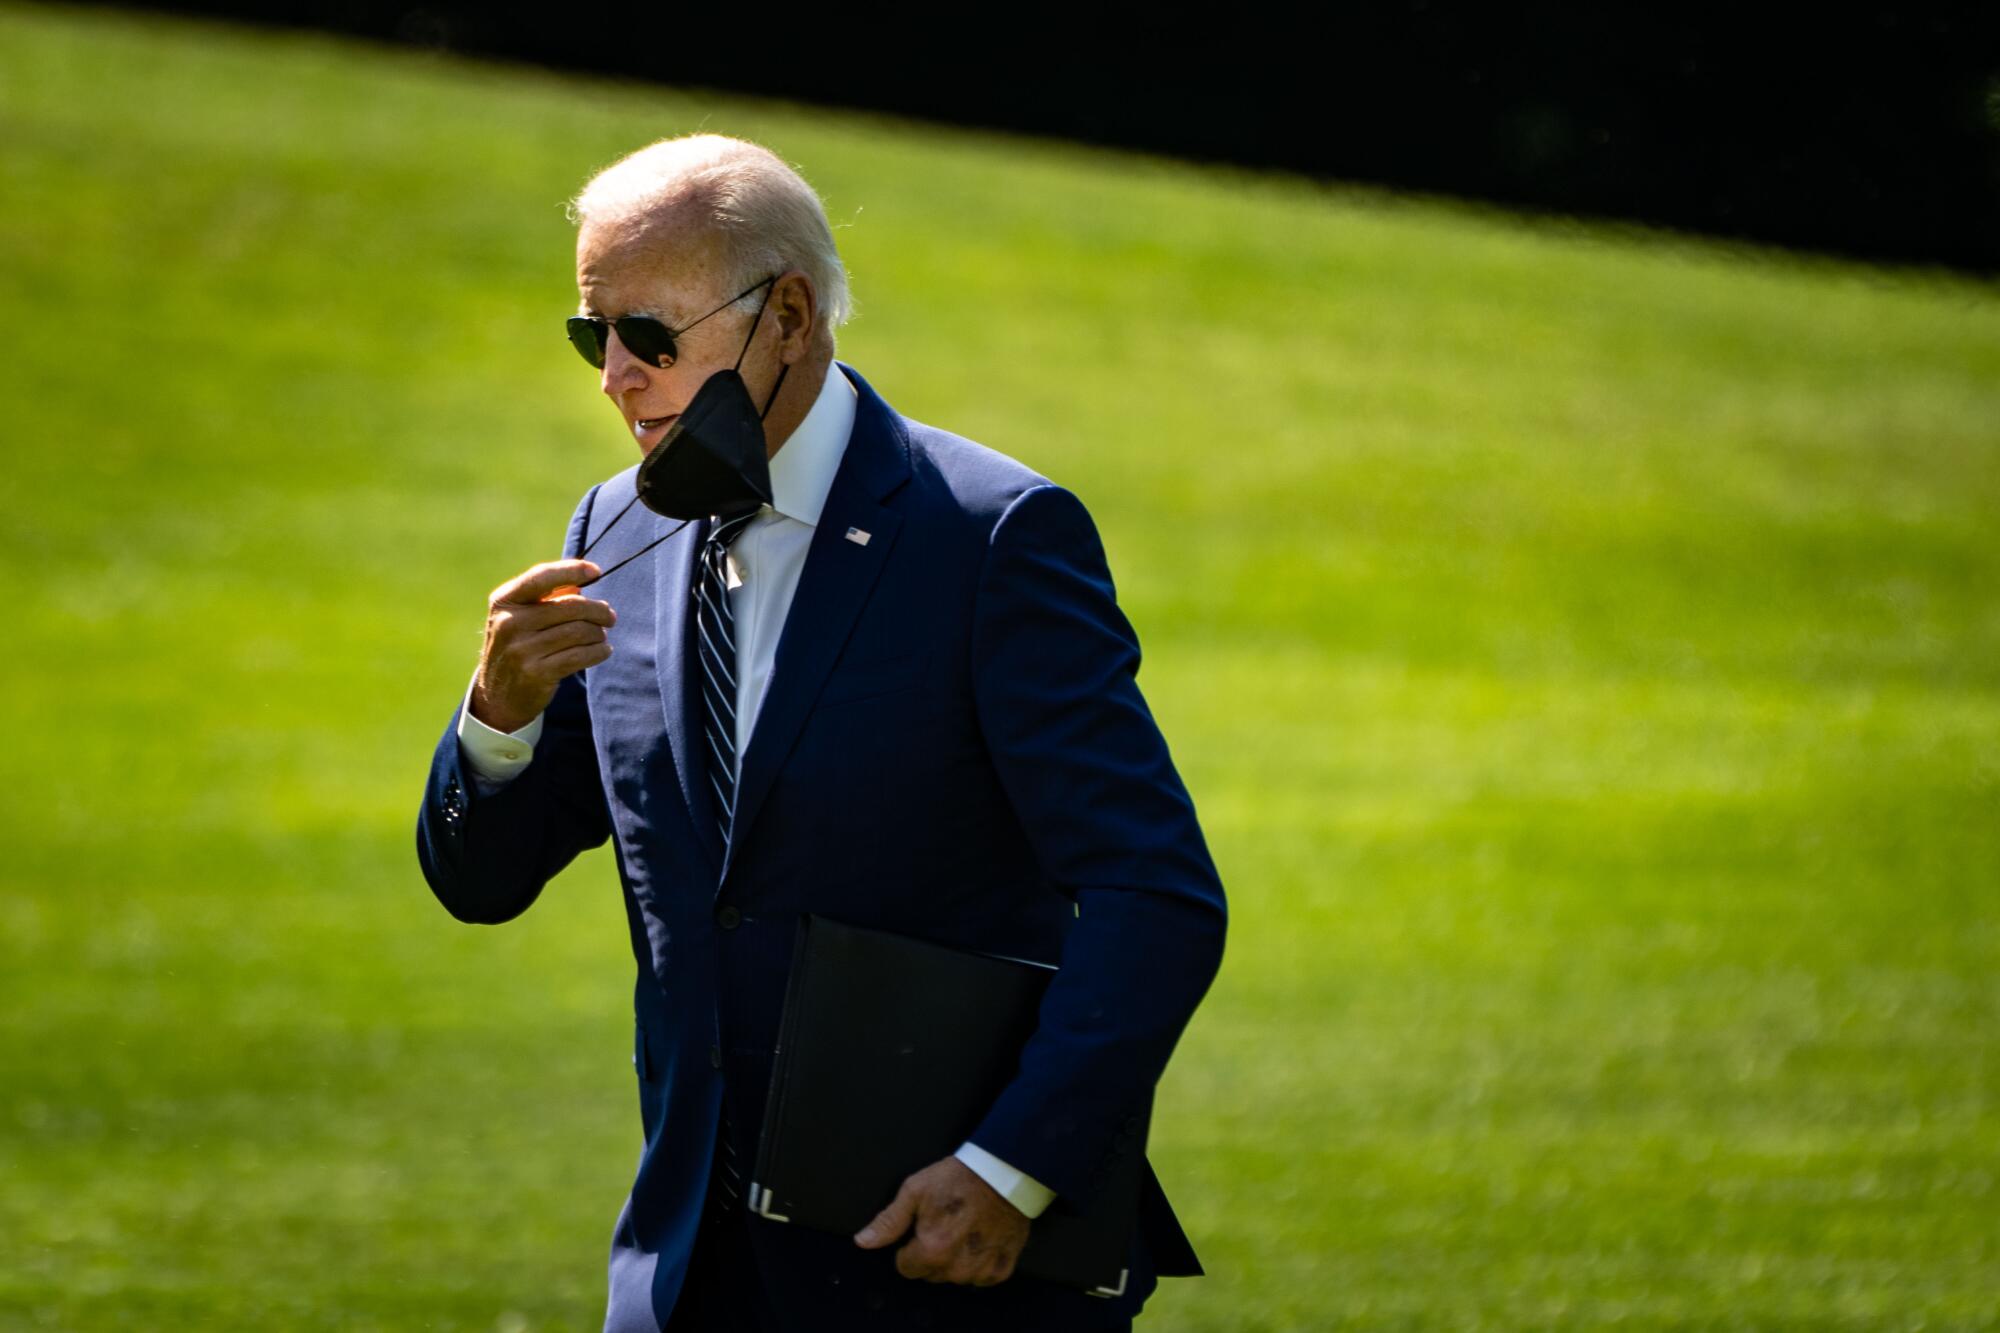 President Biden takes his mask off after disembarking from Marine One